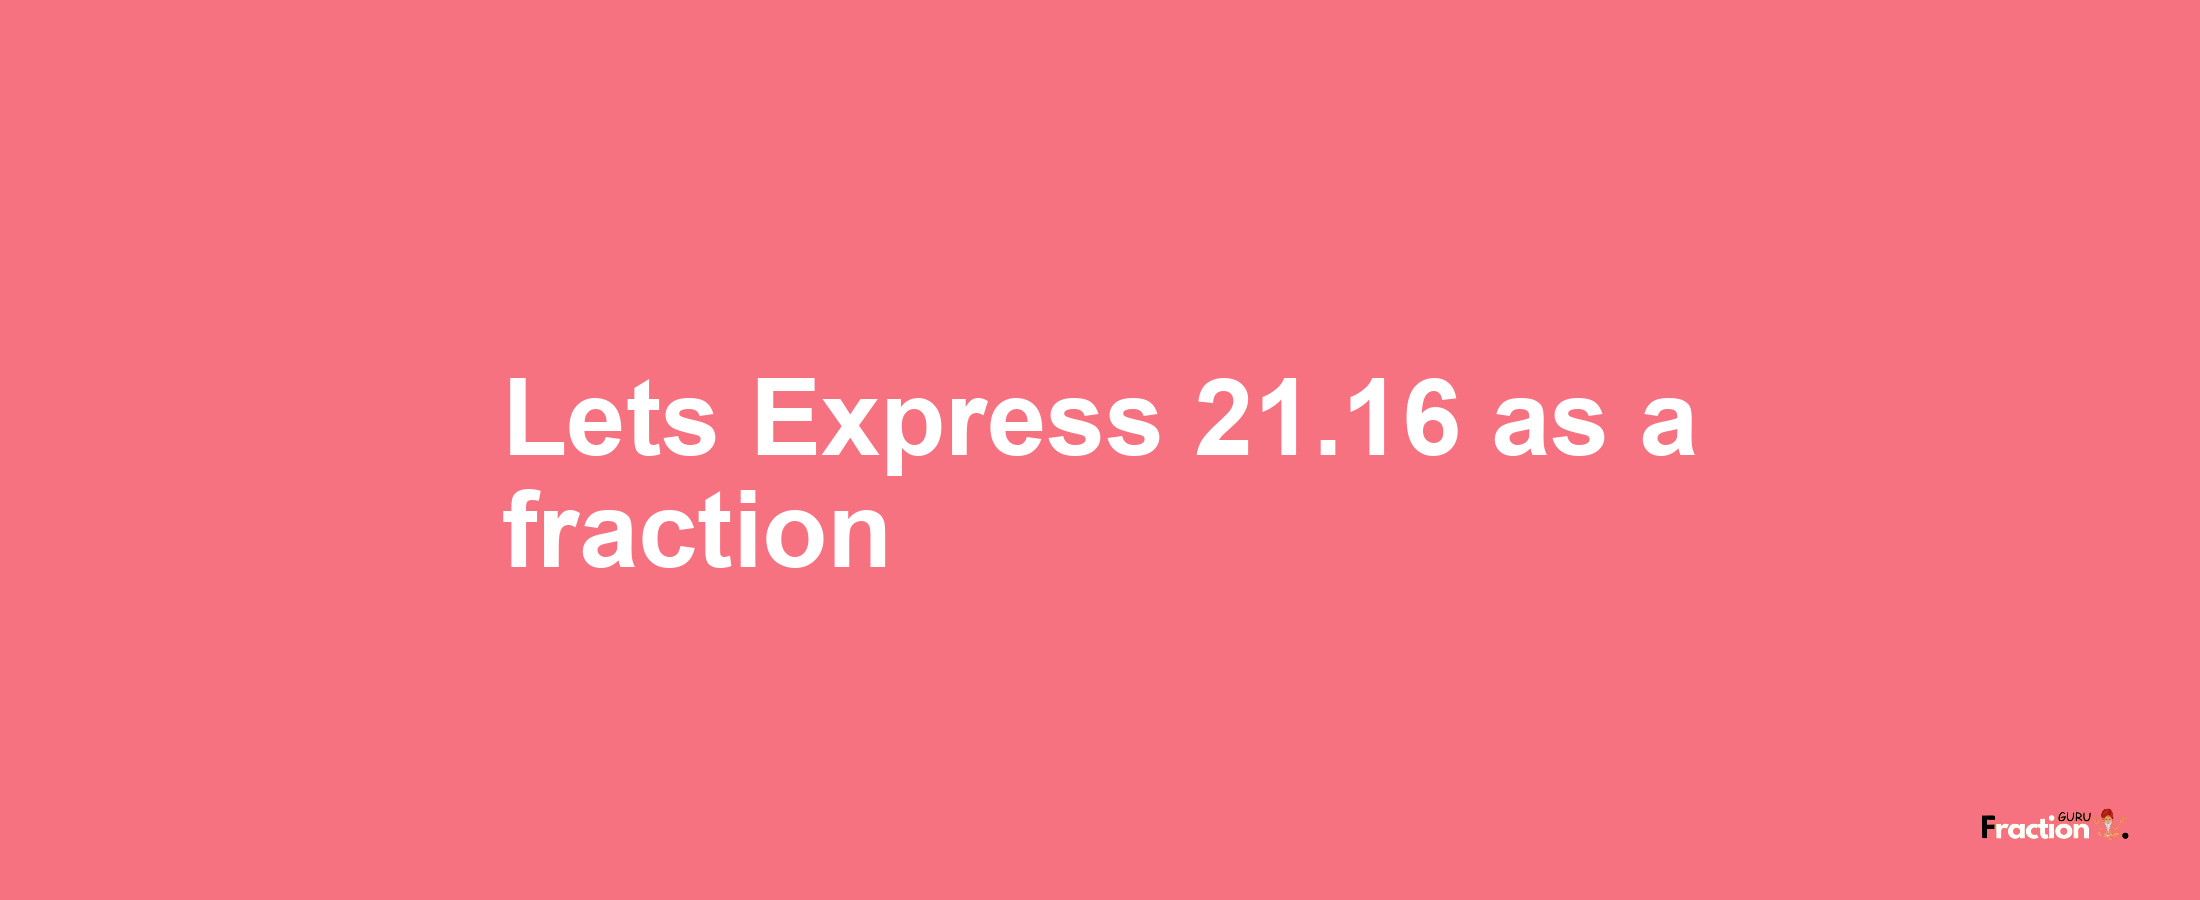 Lets Express 21.16 as afraction